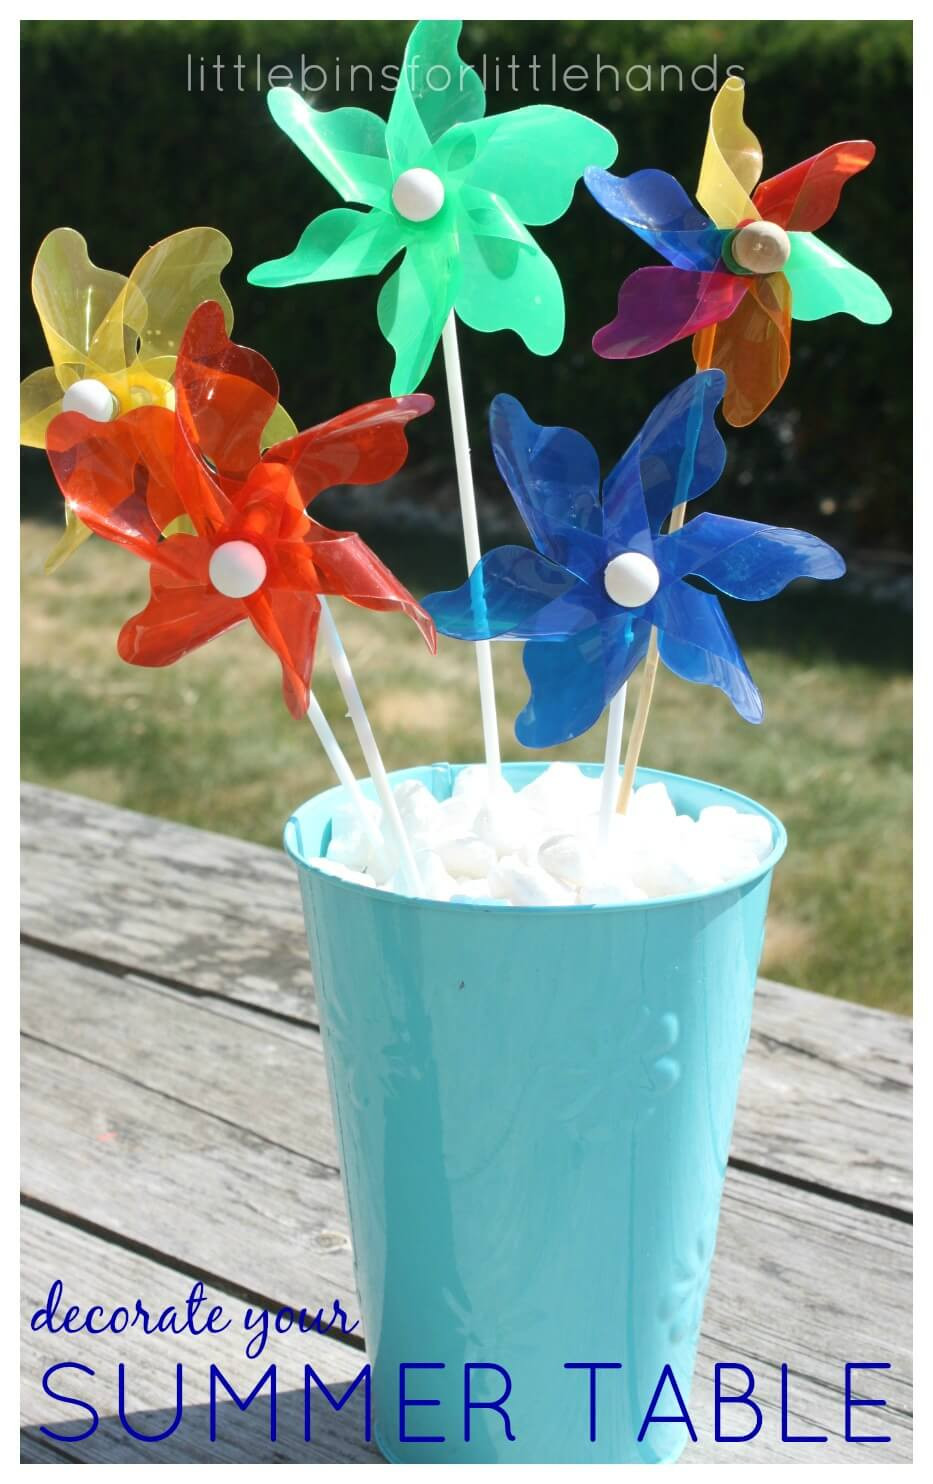 Decorating Ideas For A Summer Party
 Summer Table Decoration with Pinwheels